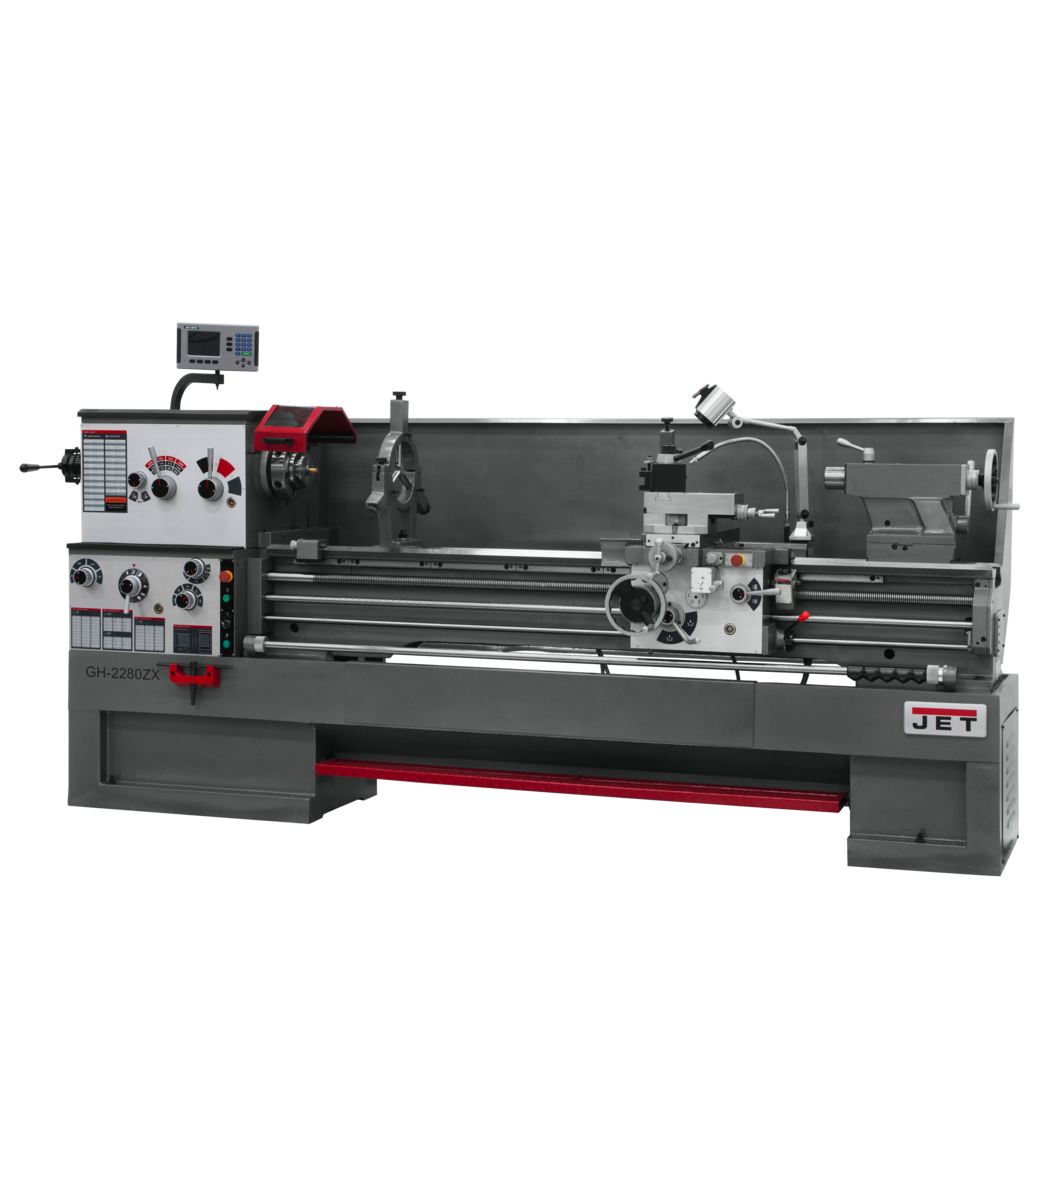 321615, GH-2280ZX , 22" Swing, 80" Between Centers, GH-2280ZX With ACU-RITE 300S DRO With Taper Attachment and Collet Closer installed, Jet, Metalworking, Turning, Lathes